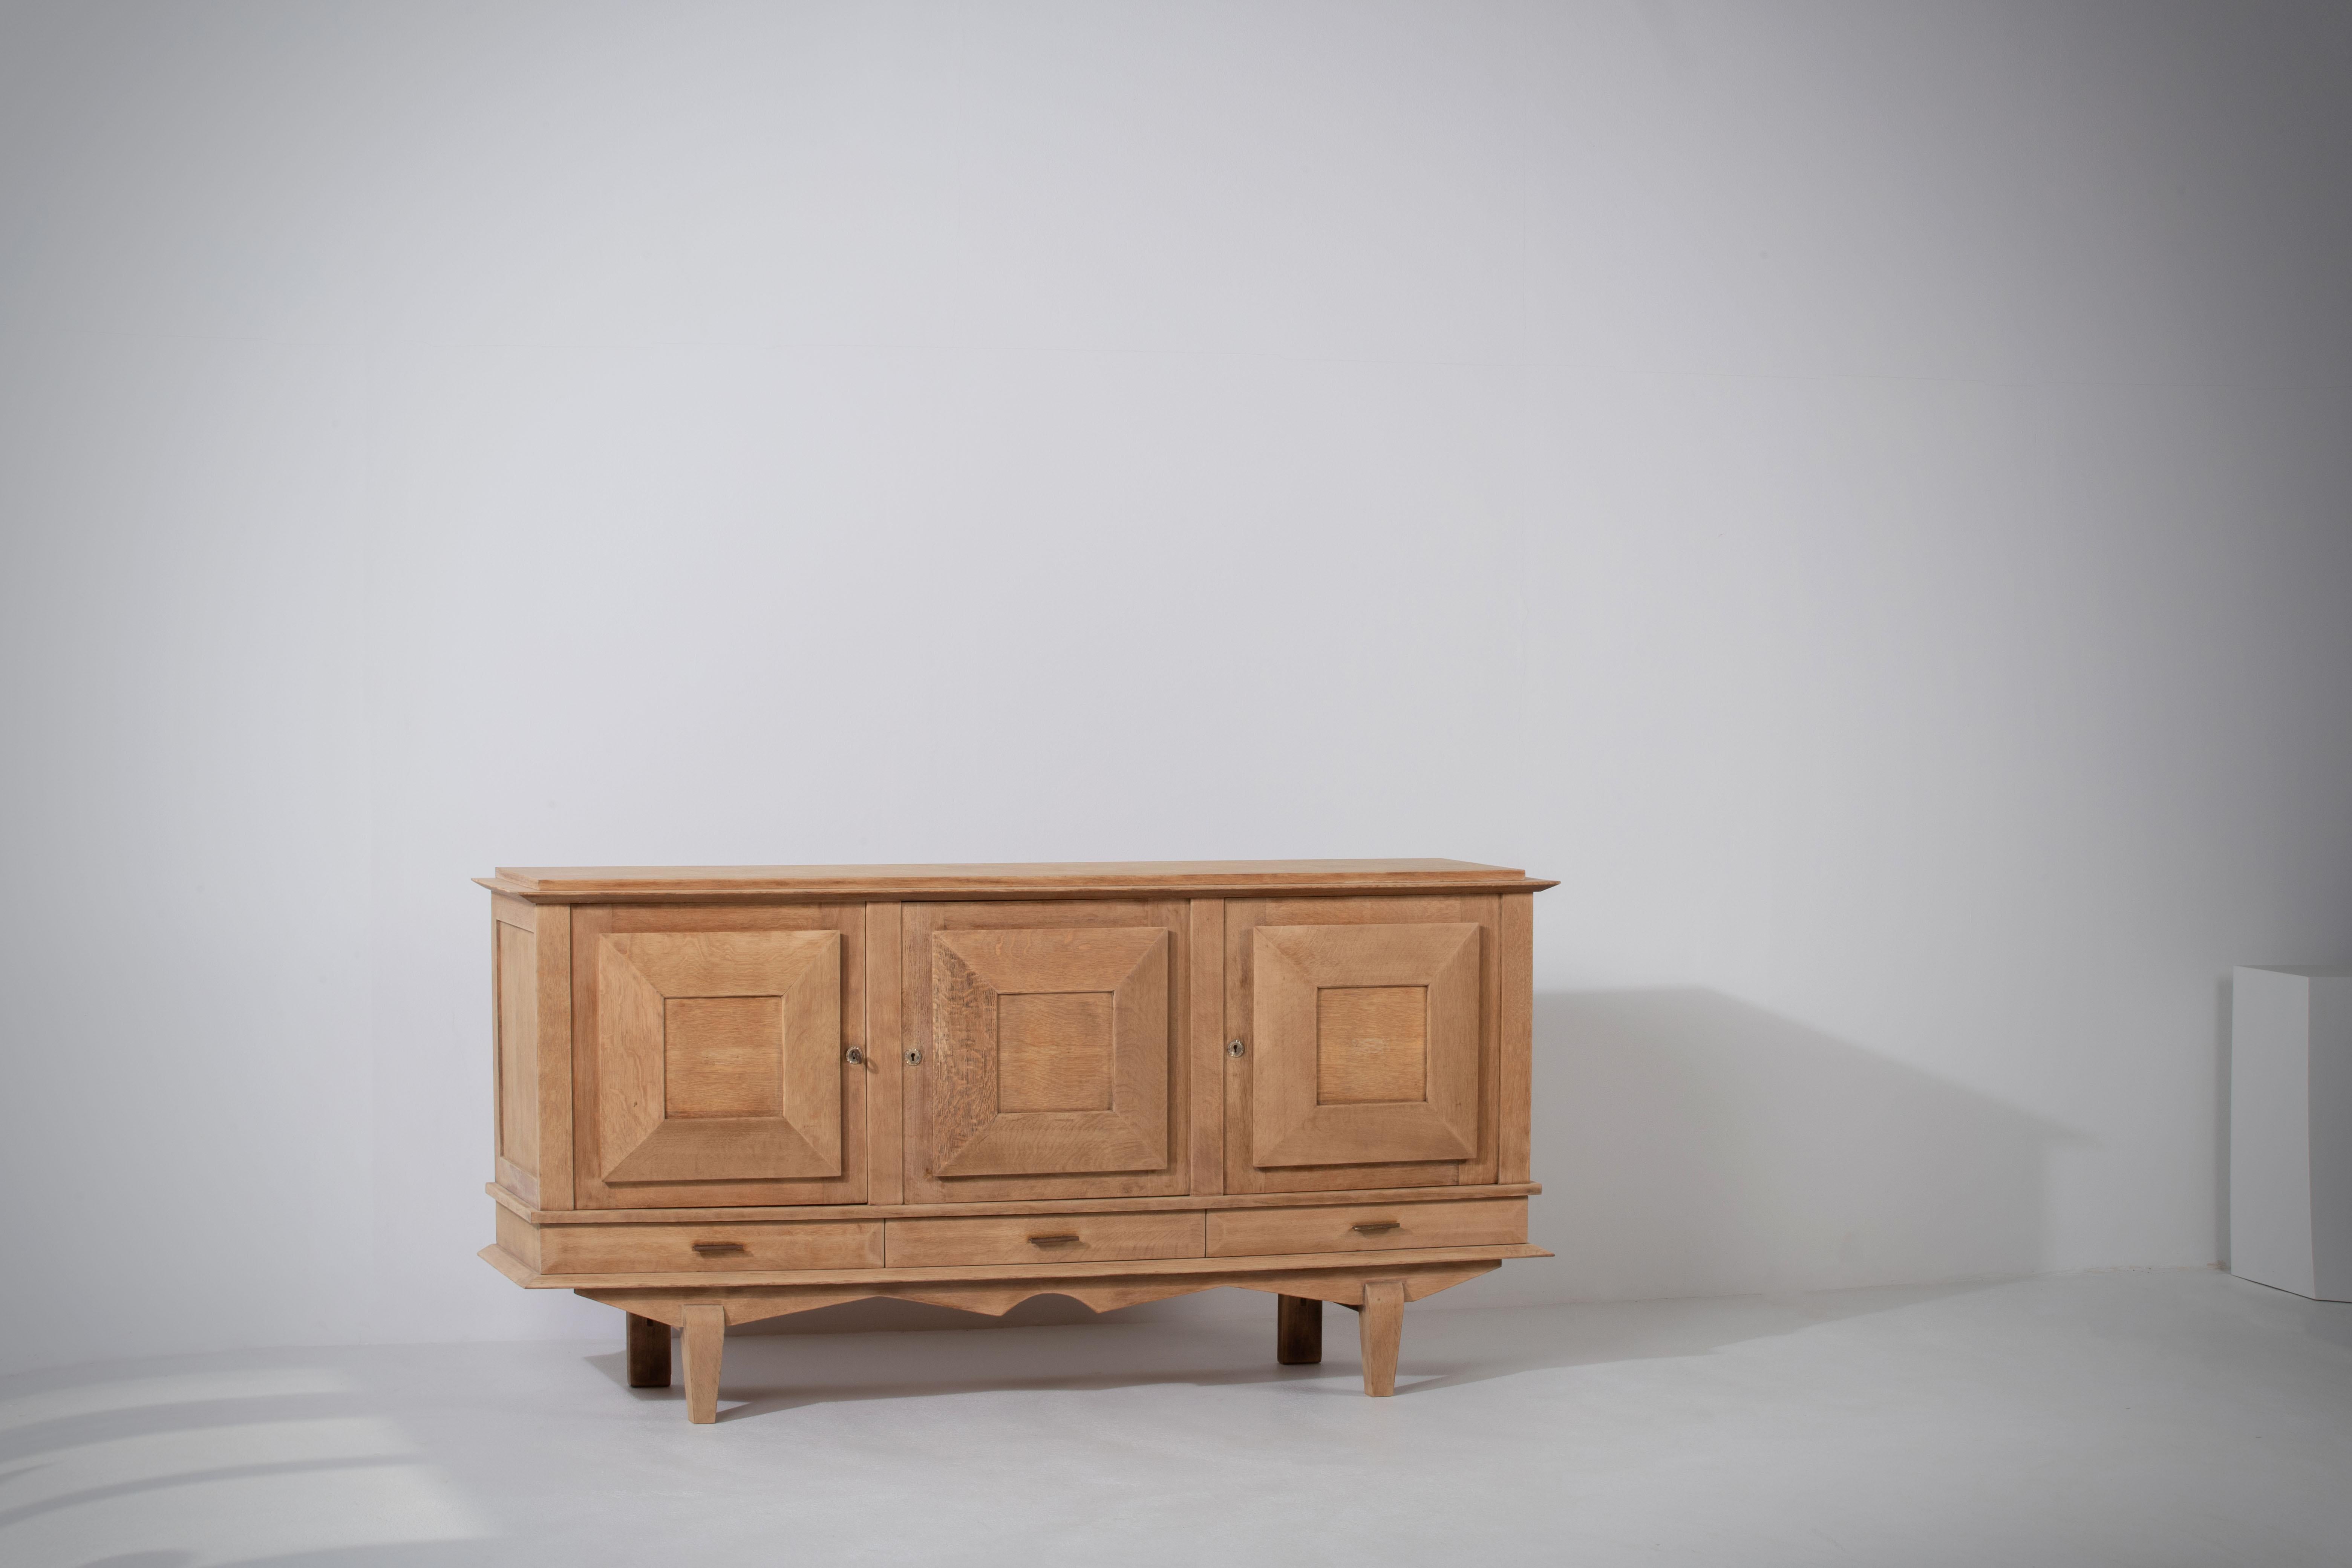 Introducing a captivating and refined 1940s Art Deco sideboard, exquisitely crafted in France from solid oak. This large and elegant credenza showcases the perfect fusion of Art Deco and Brutalist influences, making it a truly remarkable